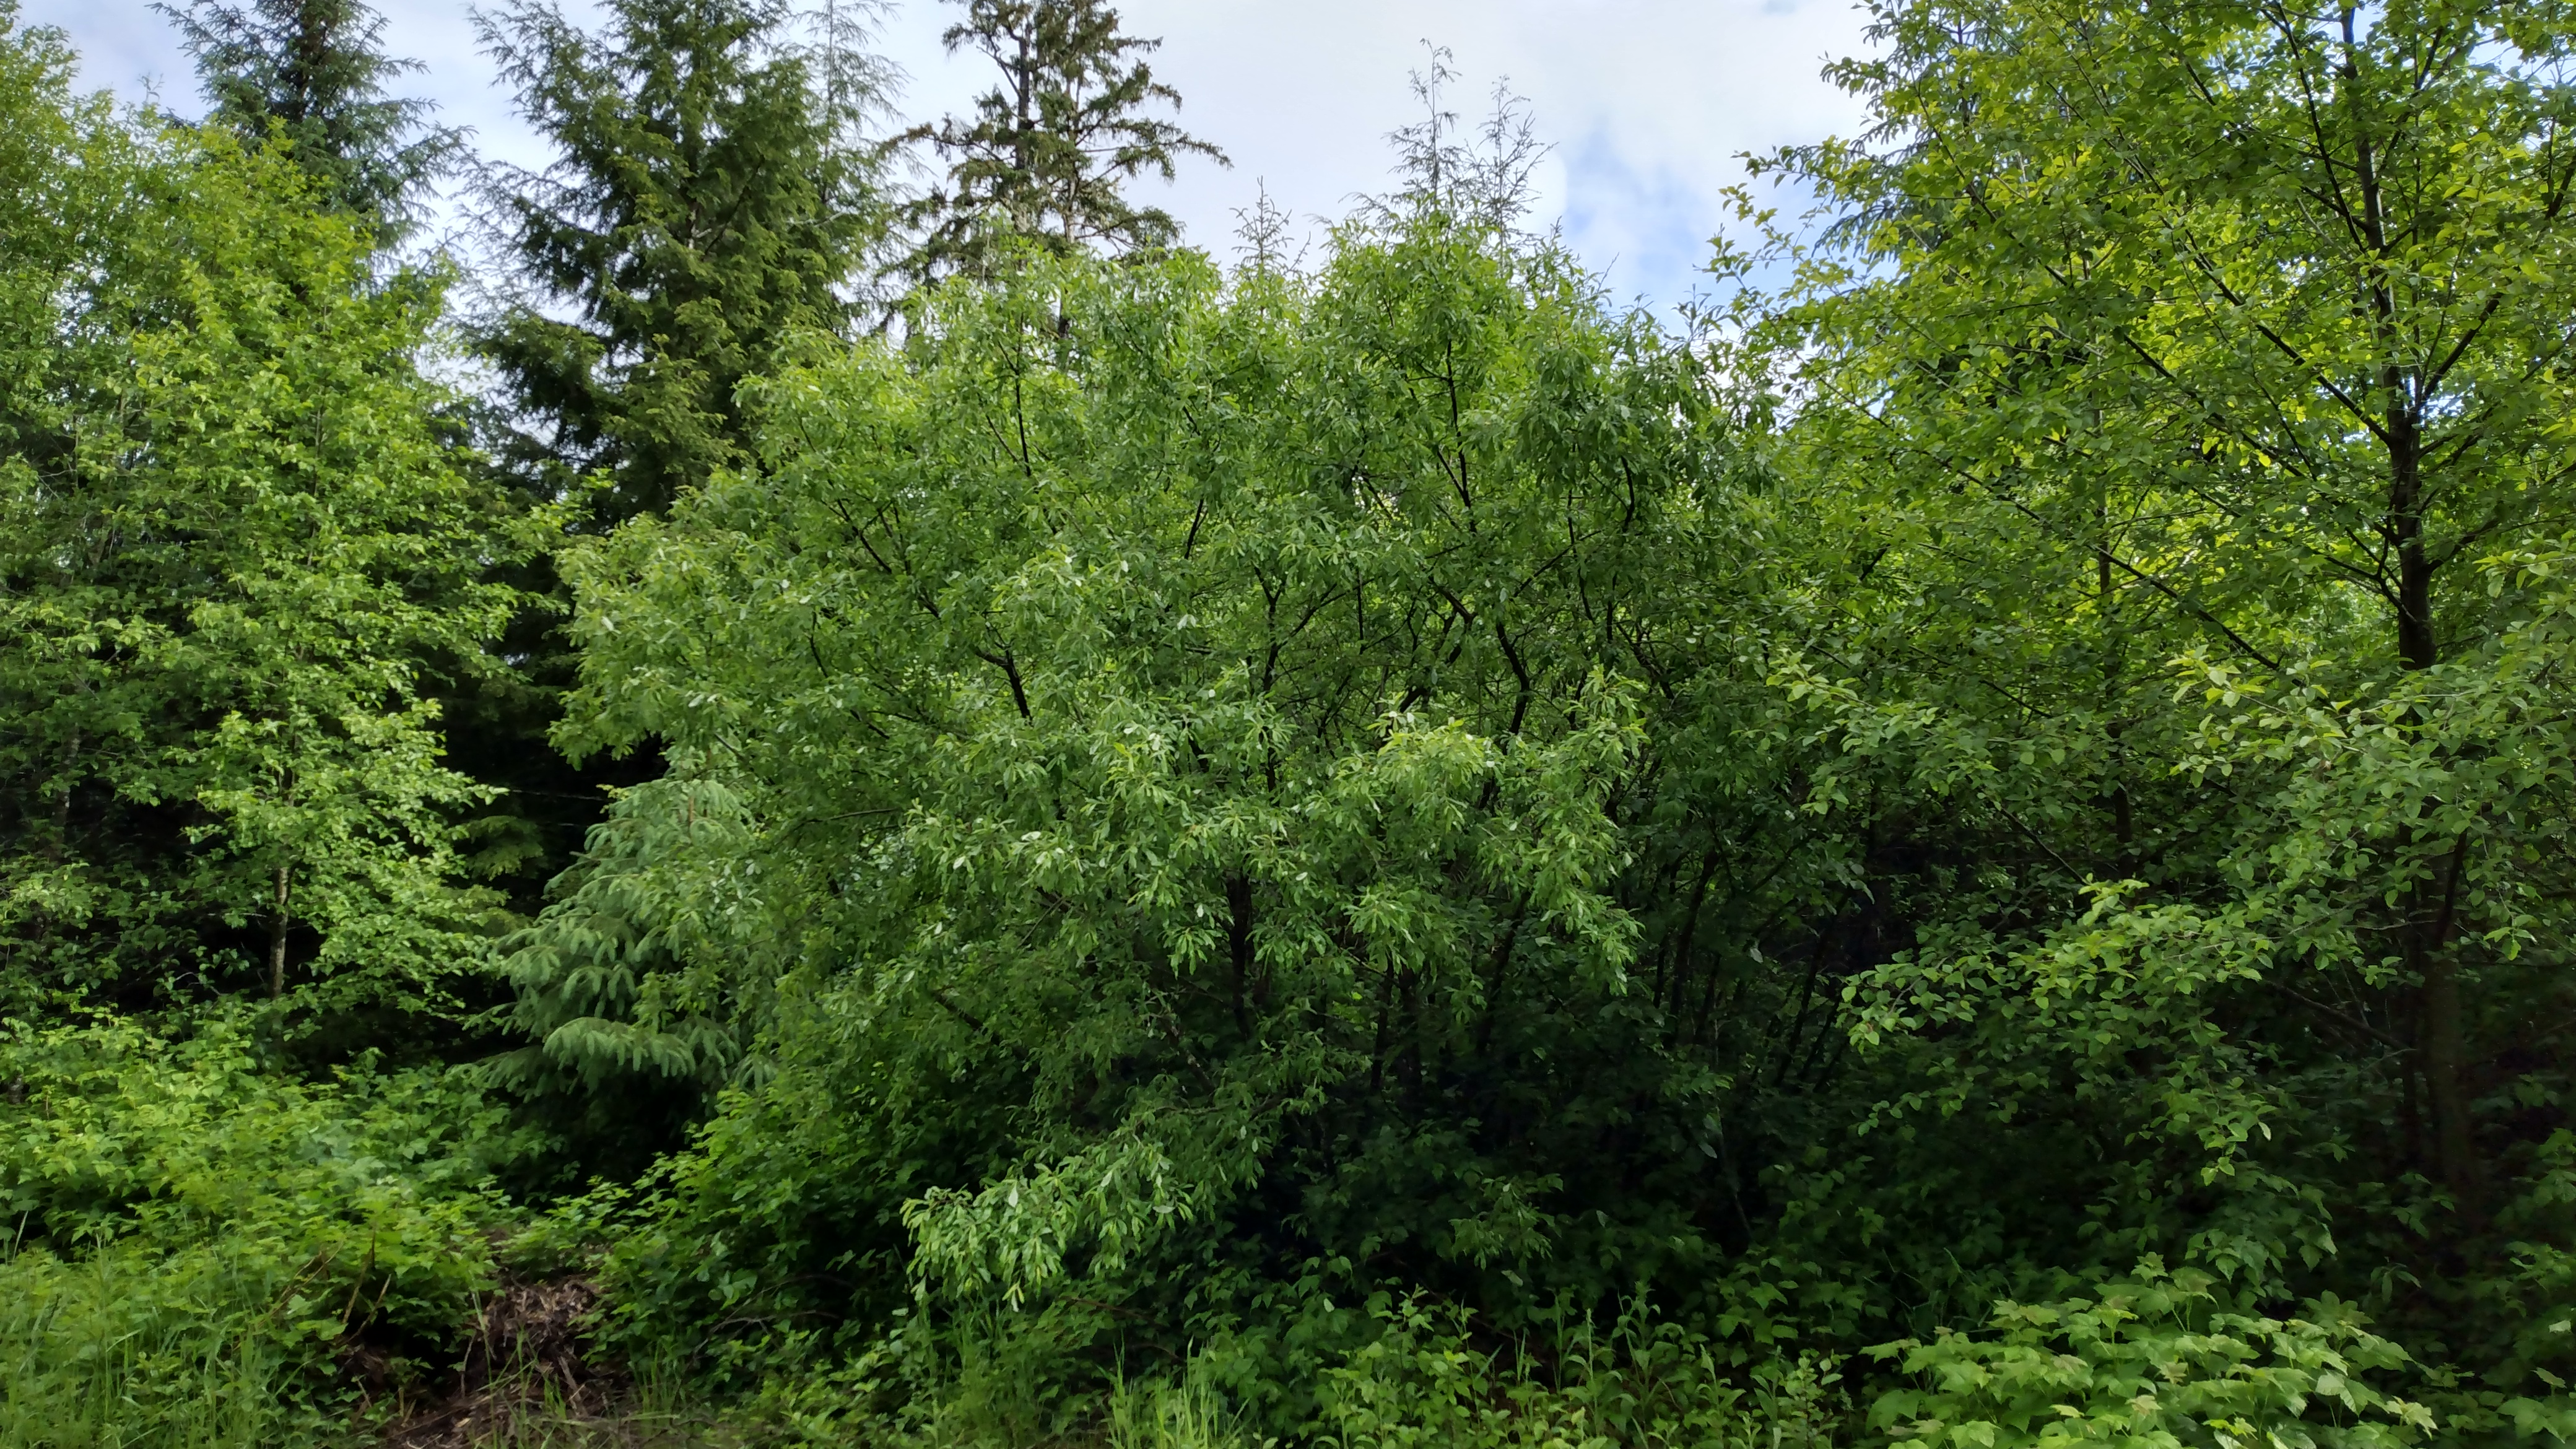 The roundish profile of the pussy-willow tree in center, blending in with other species of tree on either side into an undifferentiated panorama of green